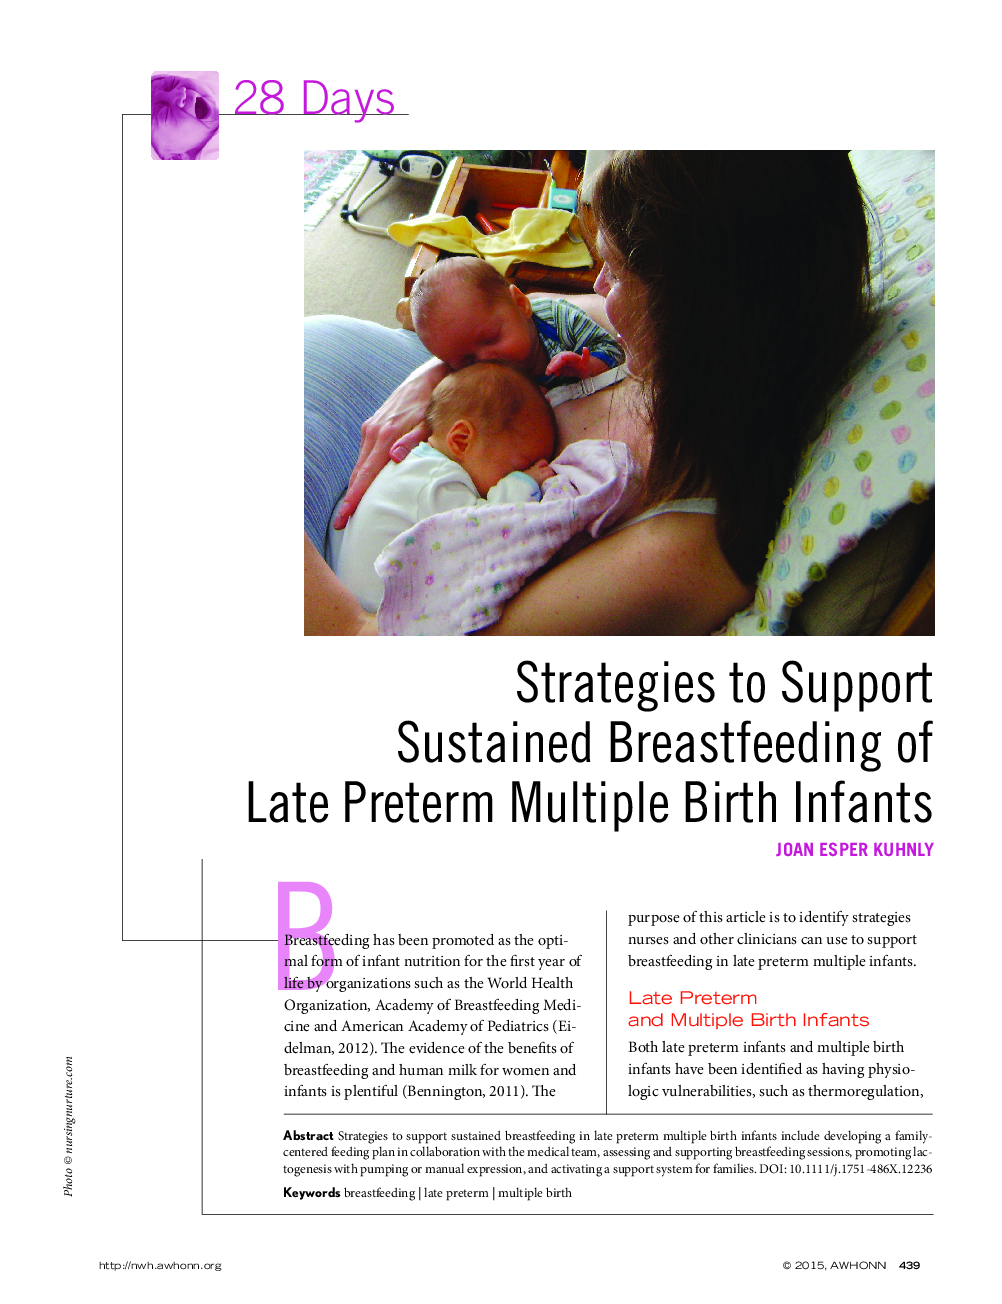 Strategies to Support Sustained Breastfeeding of Late Preterm Multiple Birth Infants